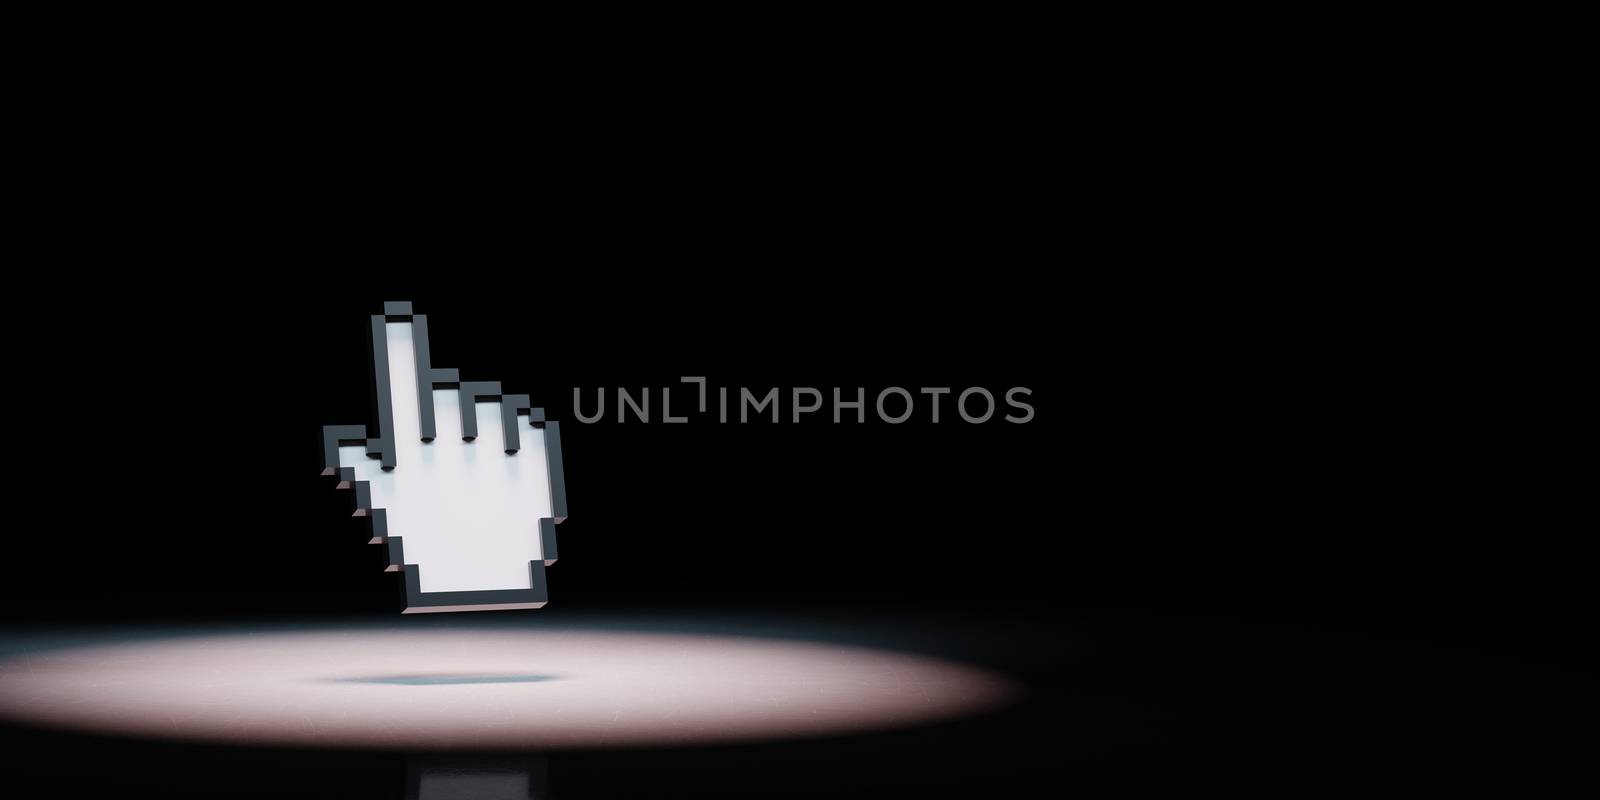 Hand Mouse Pointer Pixelated Spotlighted on Black Background with Copy Space 3D Illustration